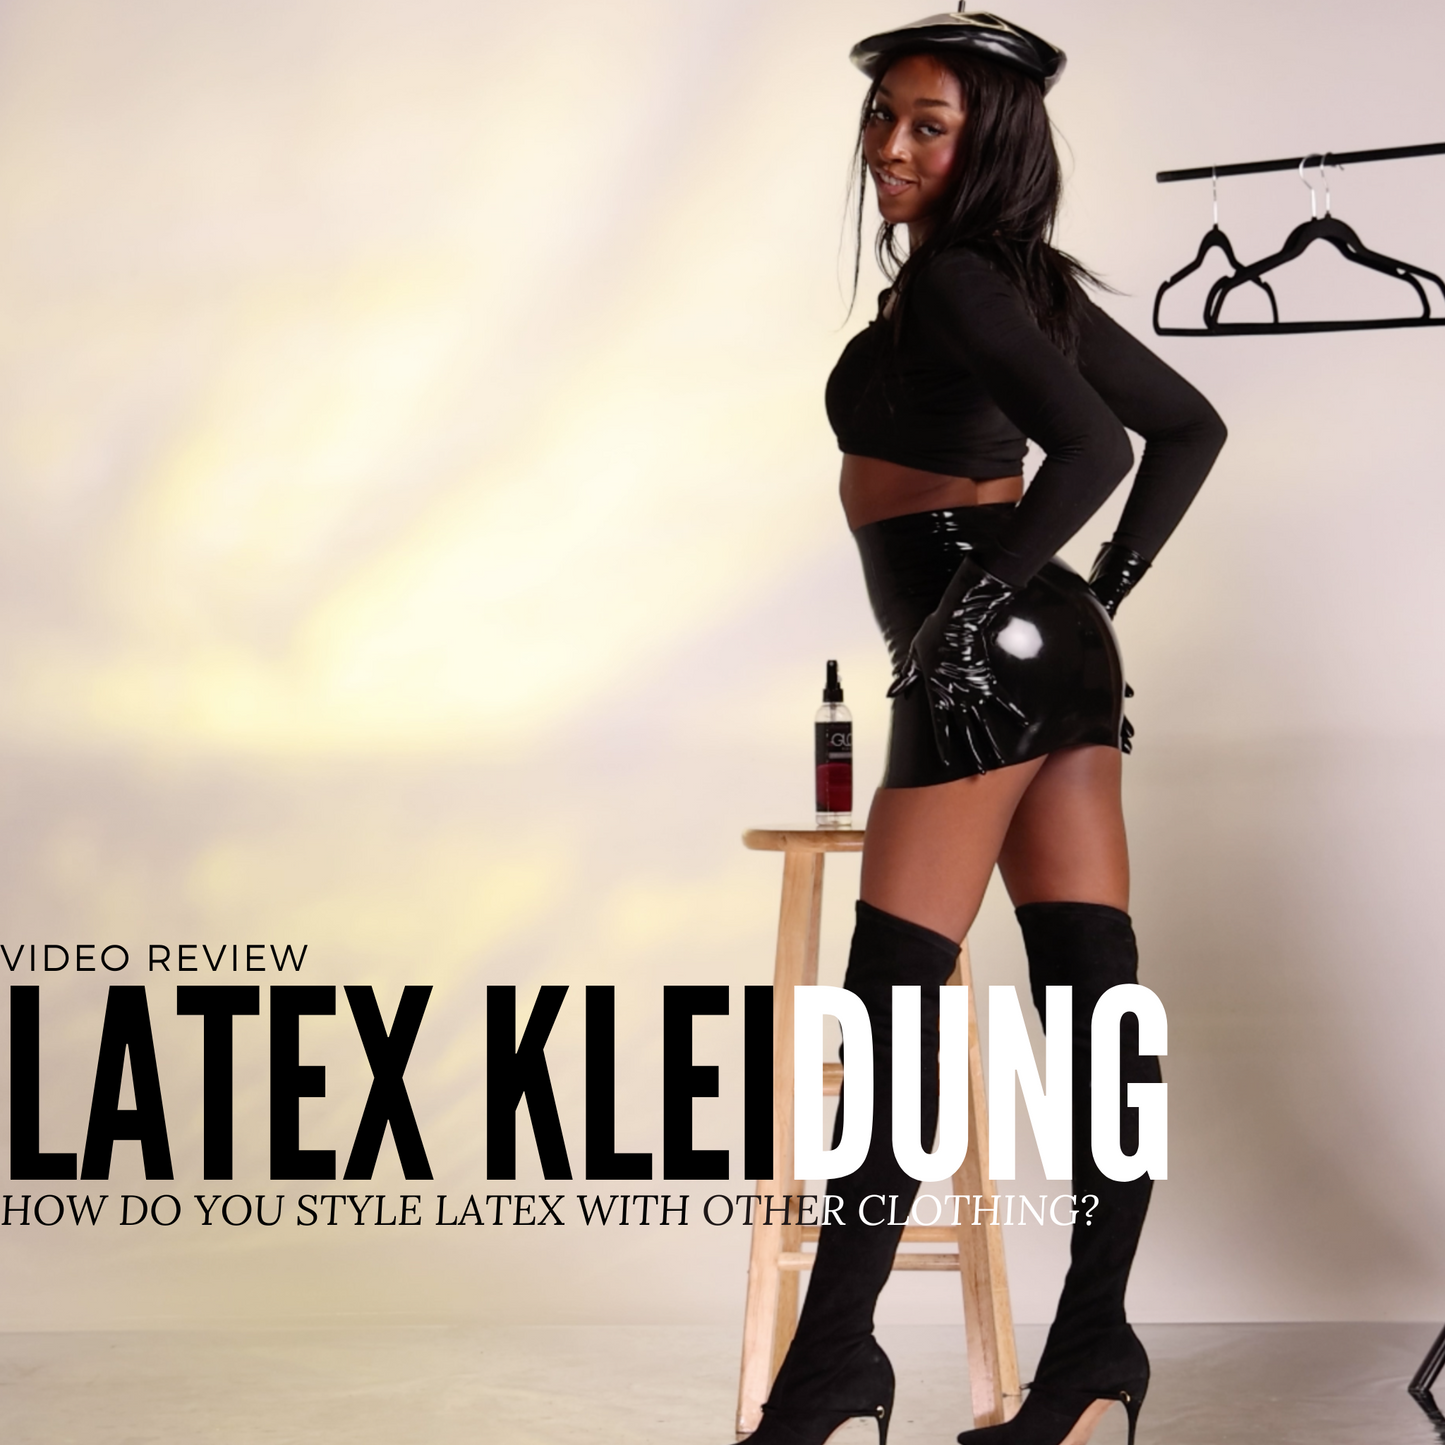 Super Sexy Latex Try On | Latex Kleidung Clothing Styled 2 Ways!